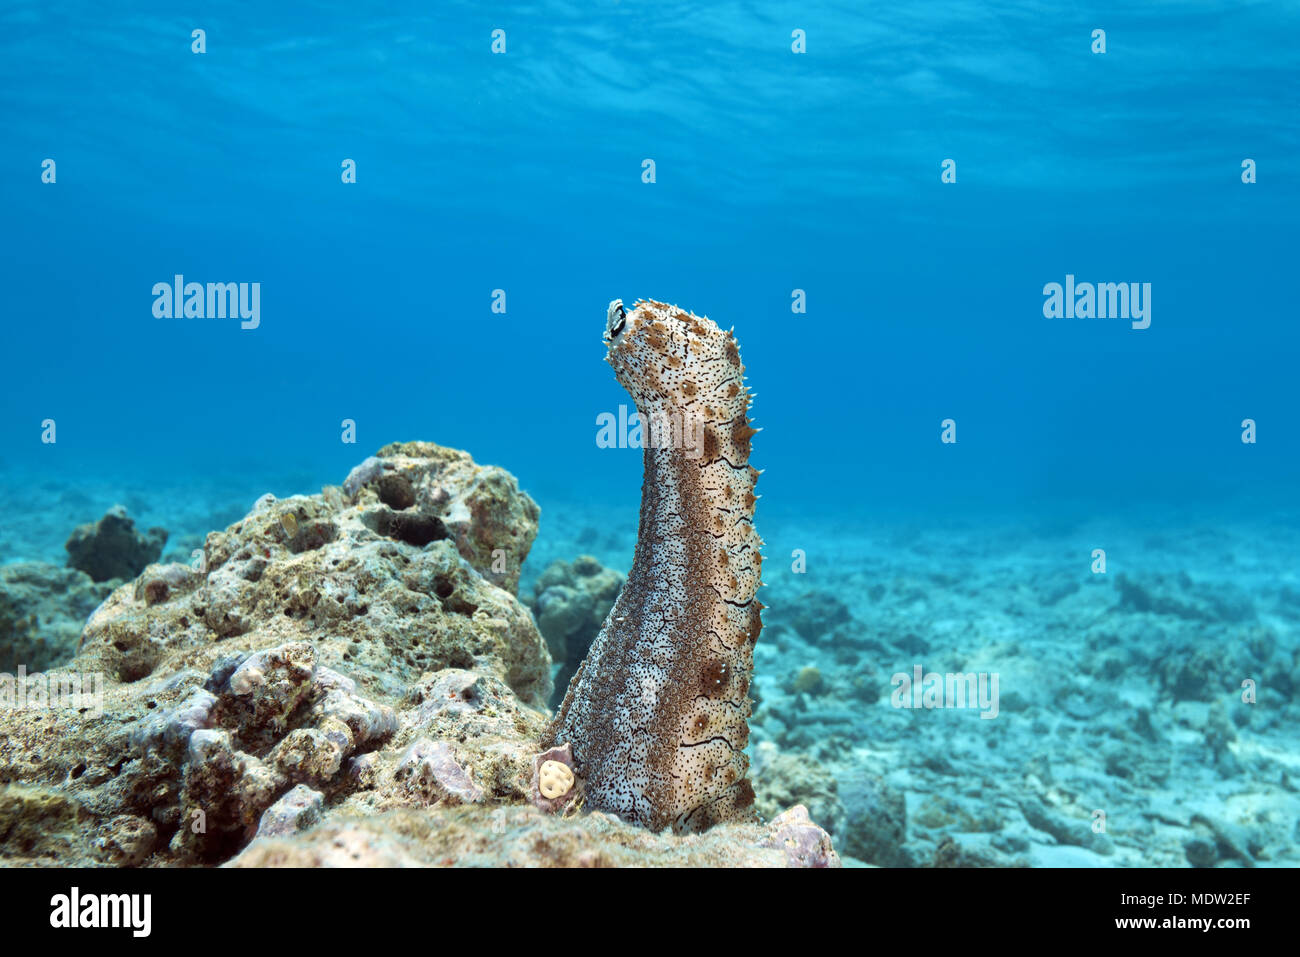 Graeffe's Sea Cucumber (Pearsonothuria graeffei) stands upright on a coral reef Stock Photo